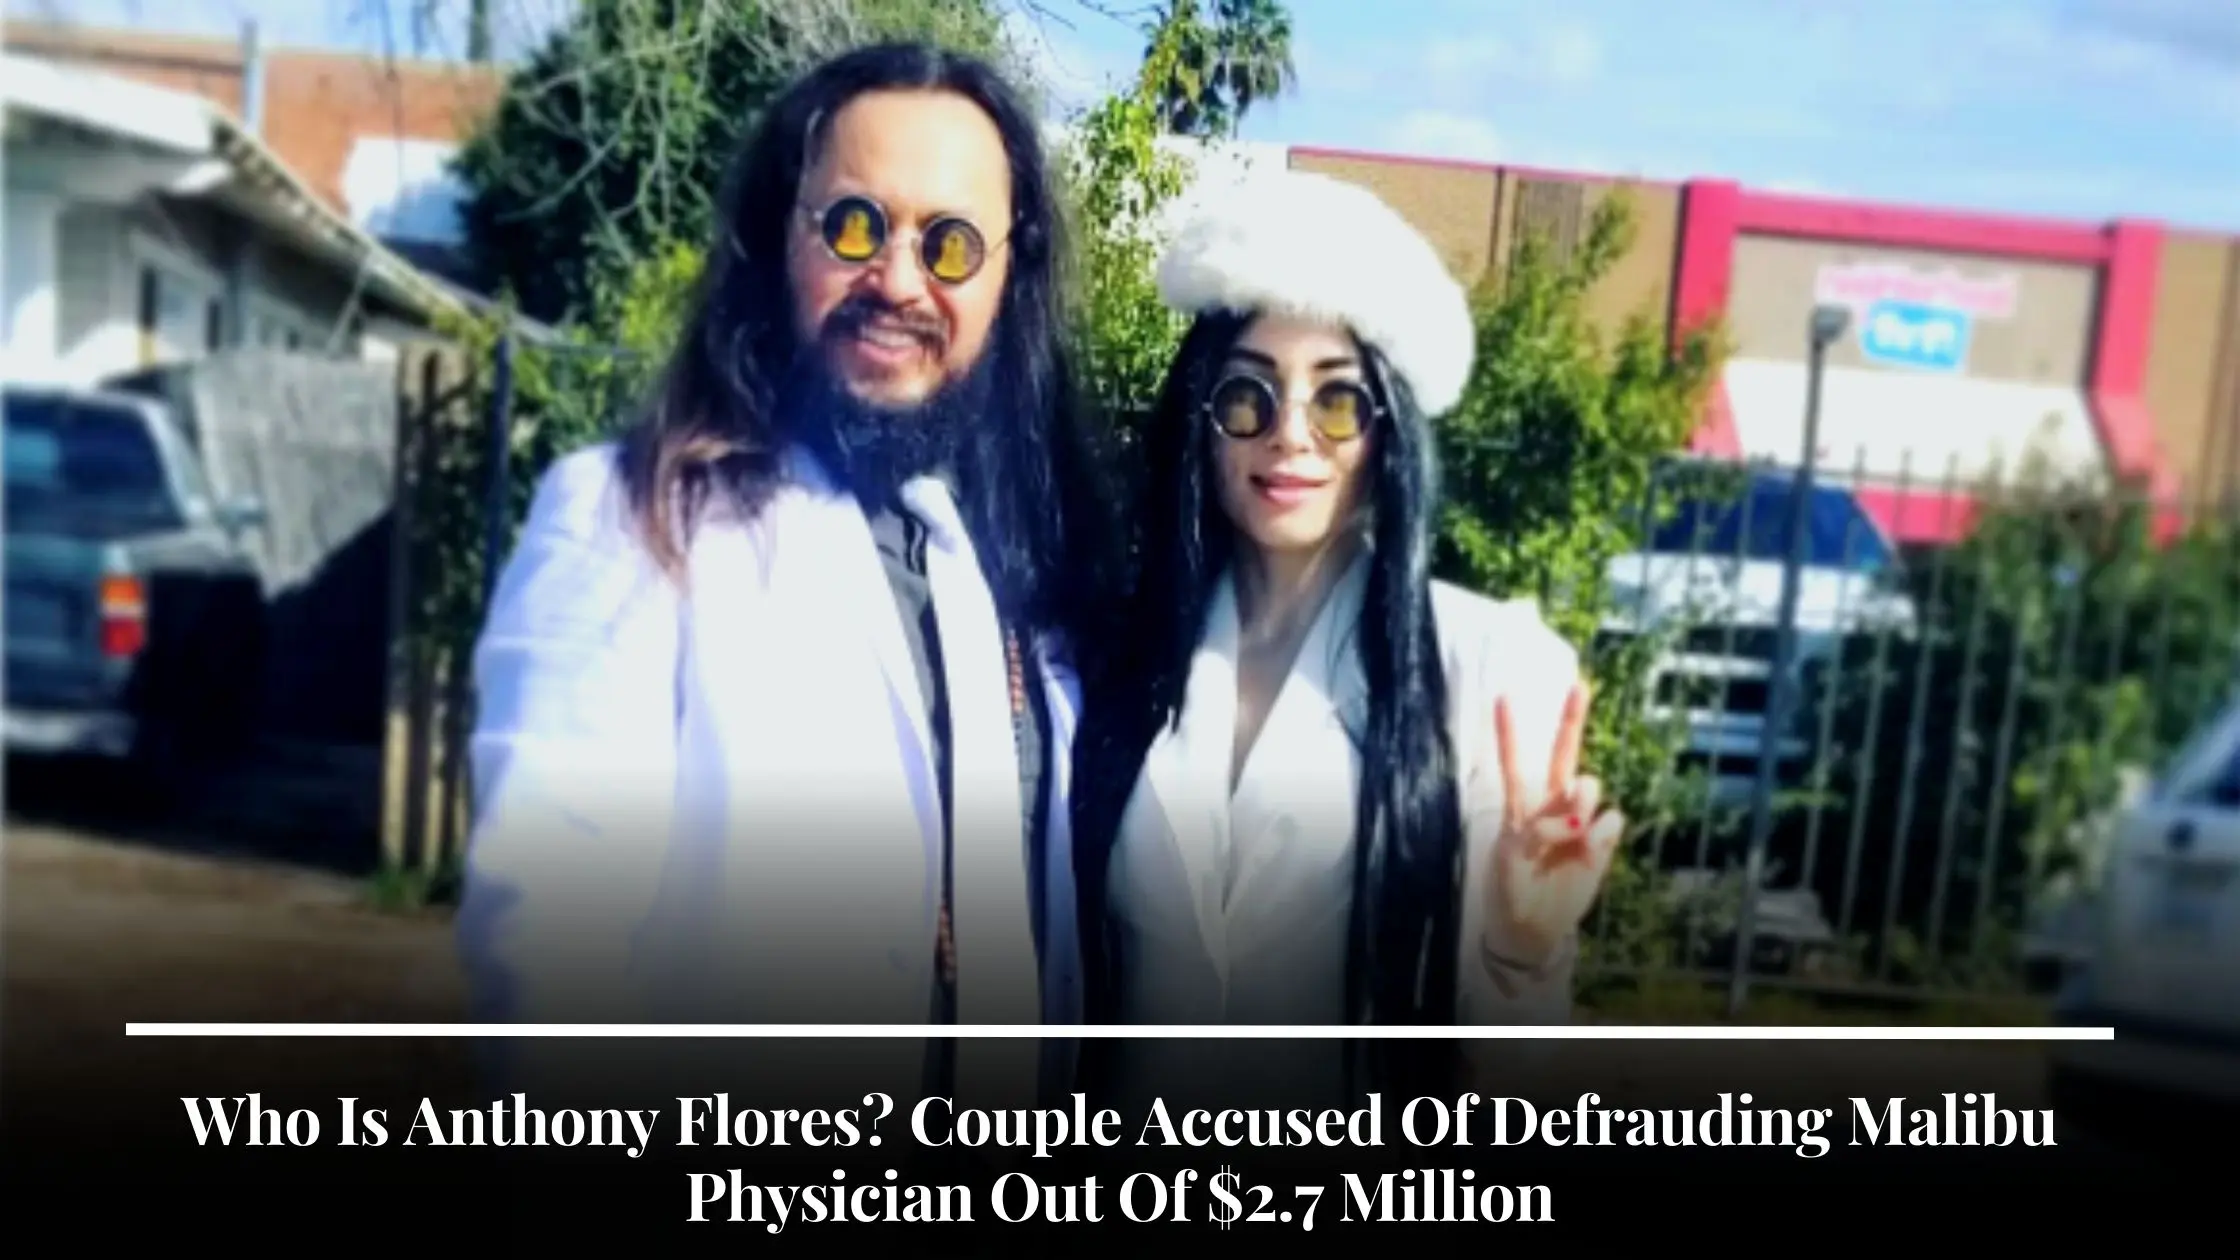 Who Is Anthony Flores Couple Accused Of Defrauding Malibu Physician Out Of $2.7 Million